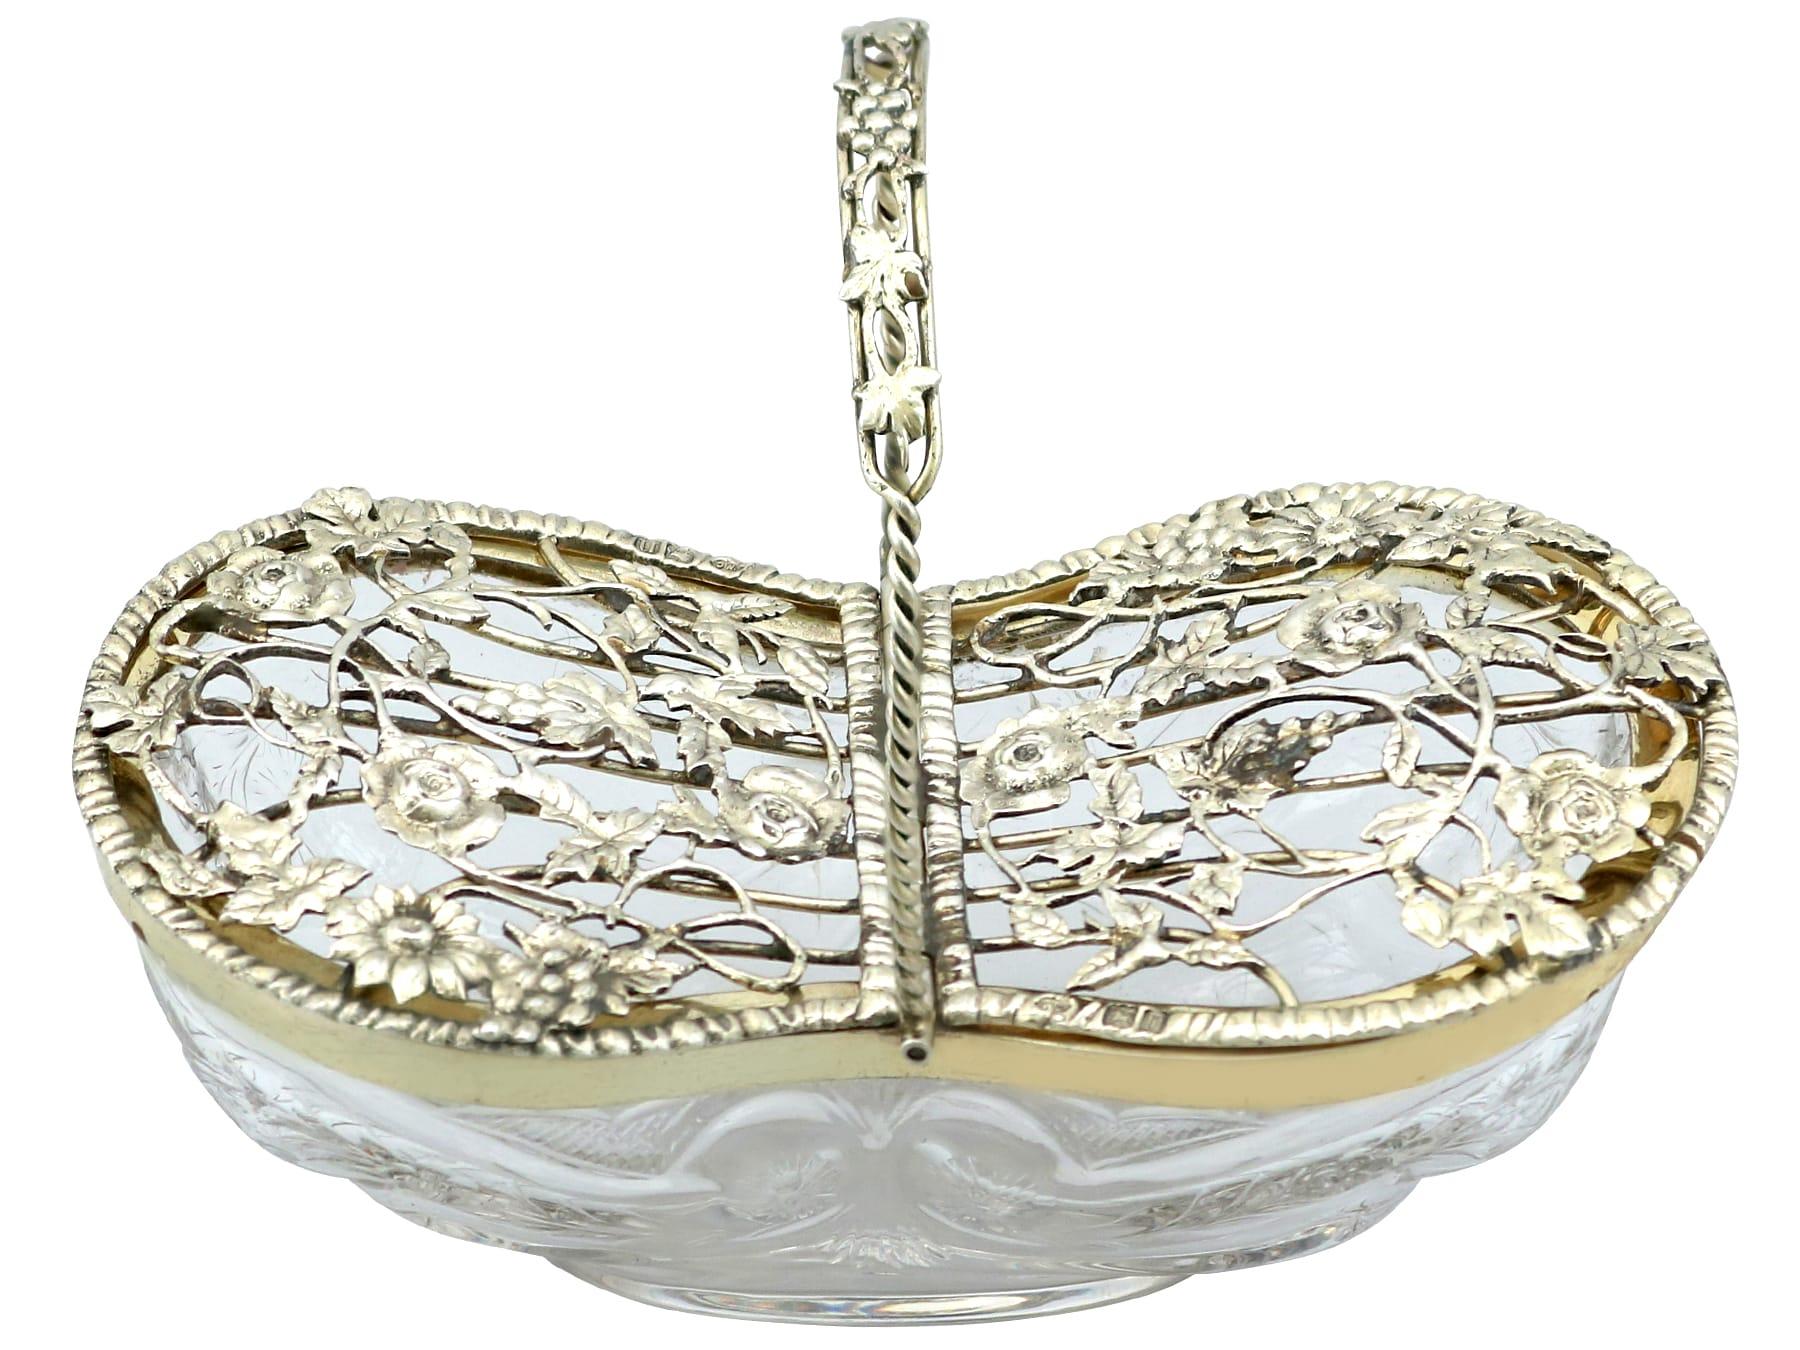 20th Century Edwardian Sterling Silver Potpourri Basket  In Excellent Condition For Sale In Jesmond, Newcastle Upon Tyne